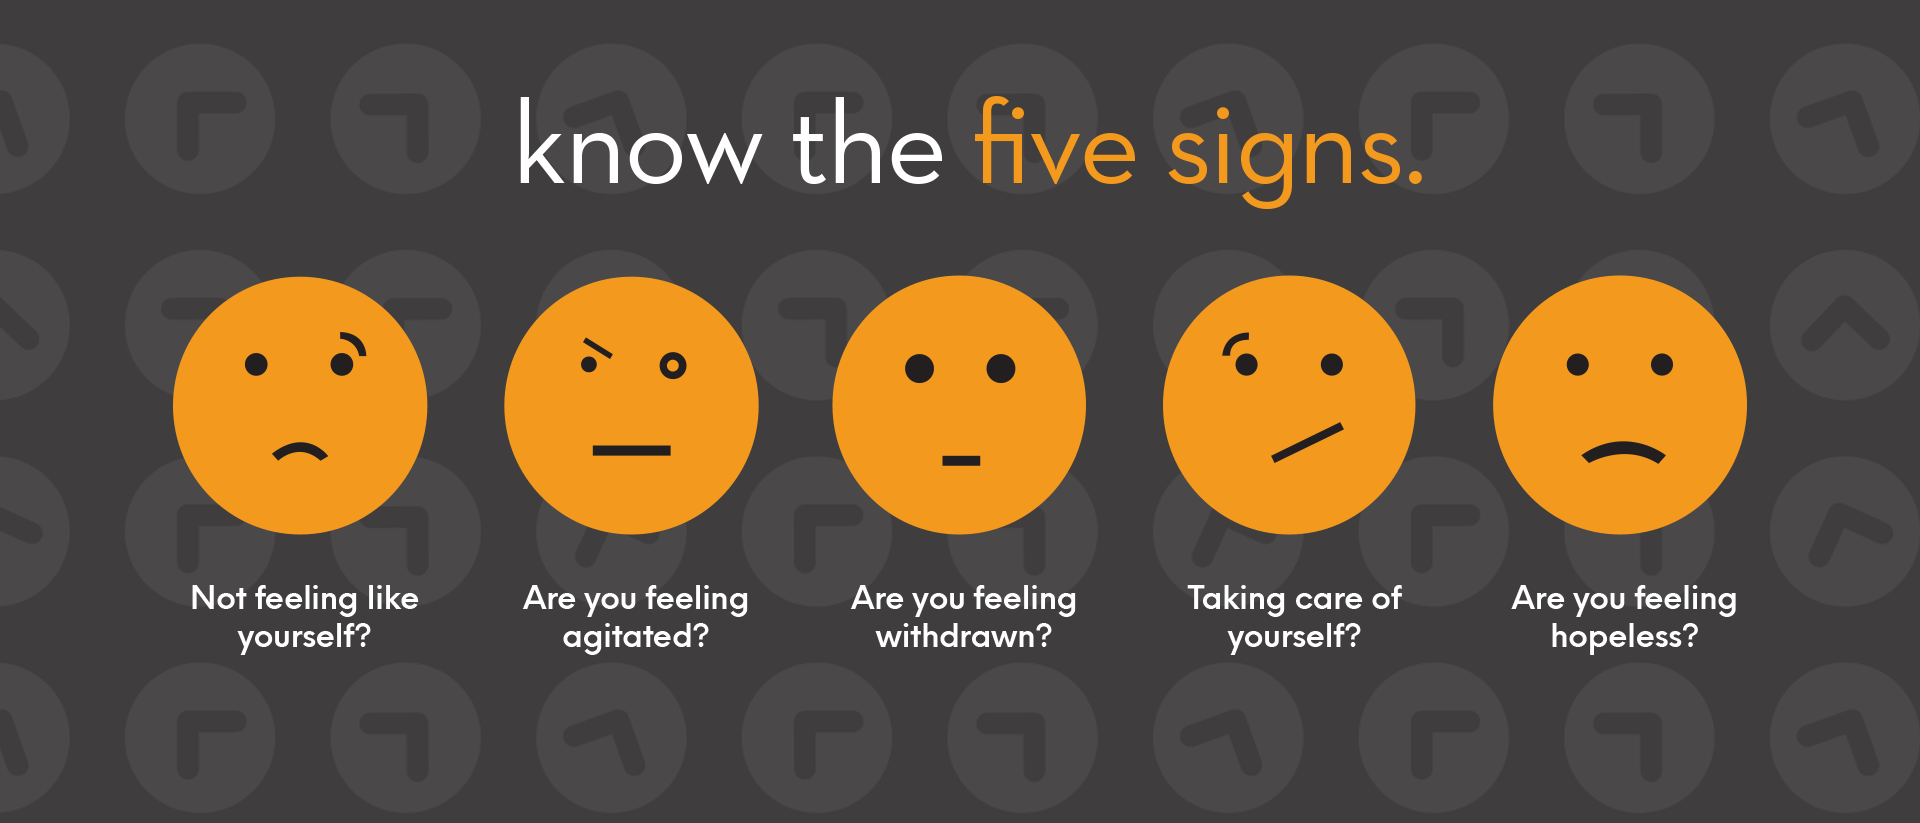 Five Signs of Good Mental Health